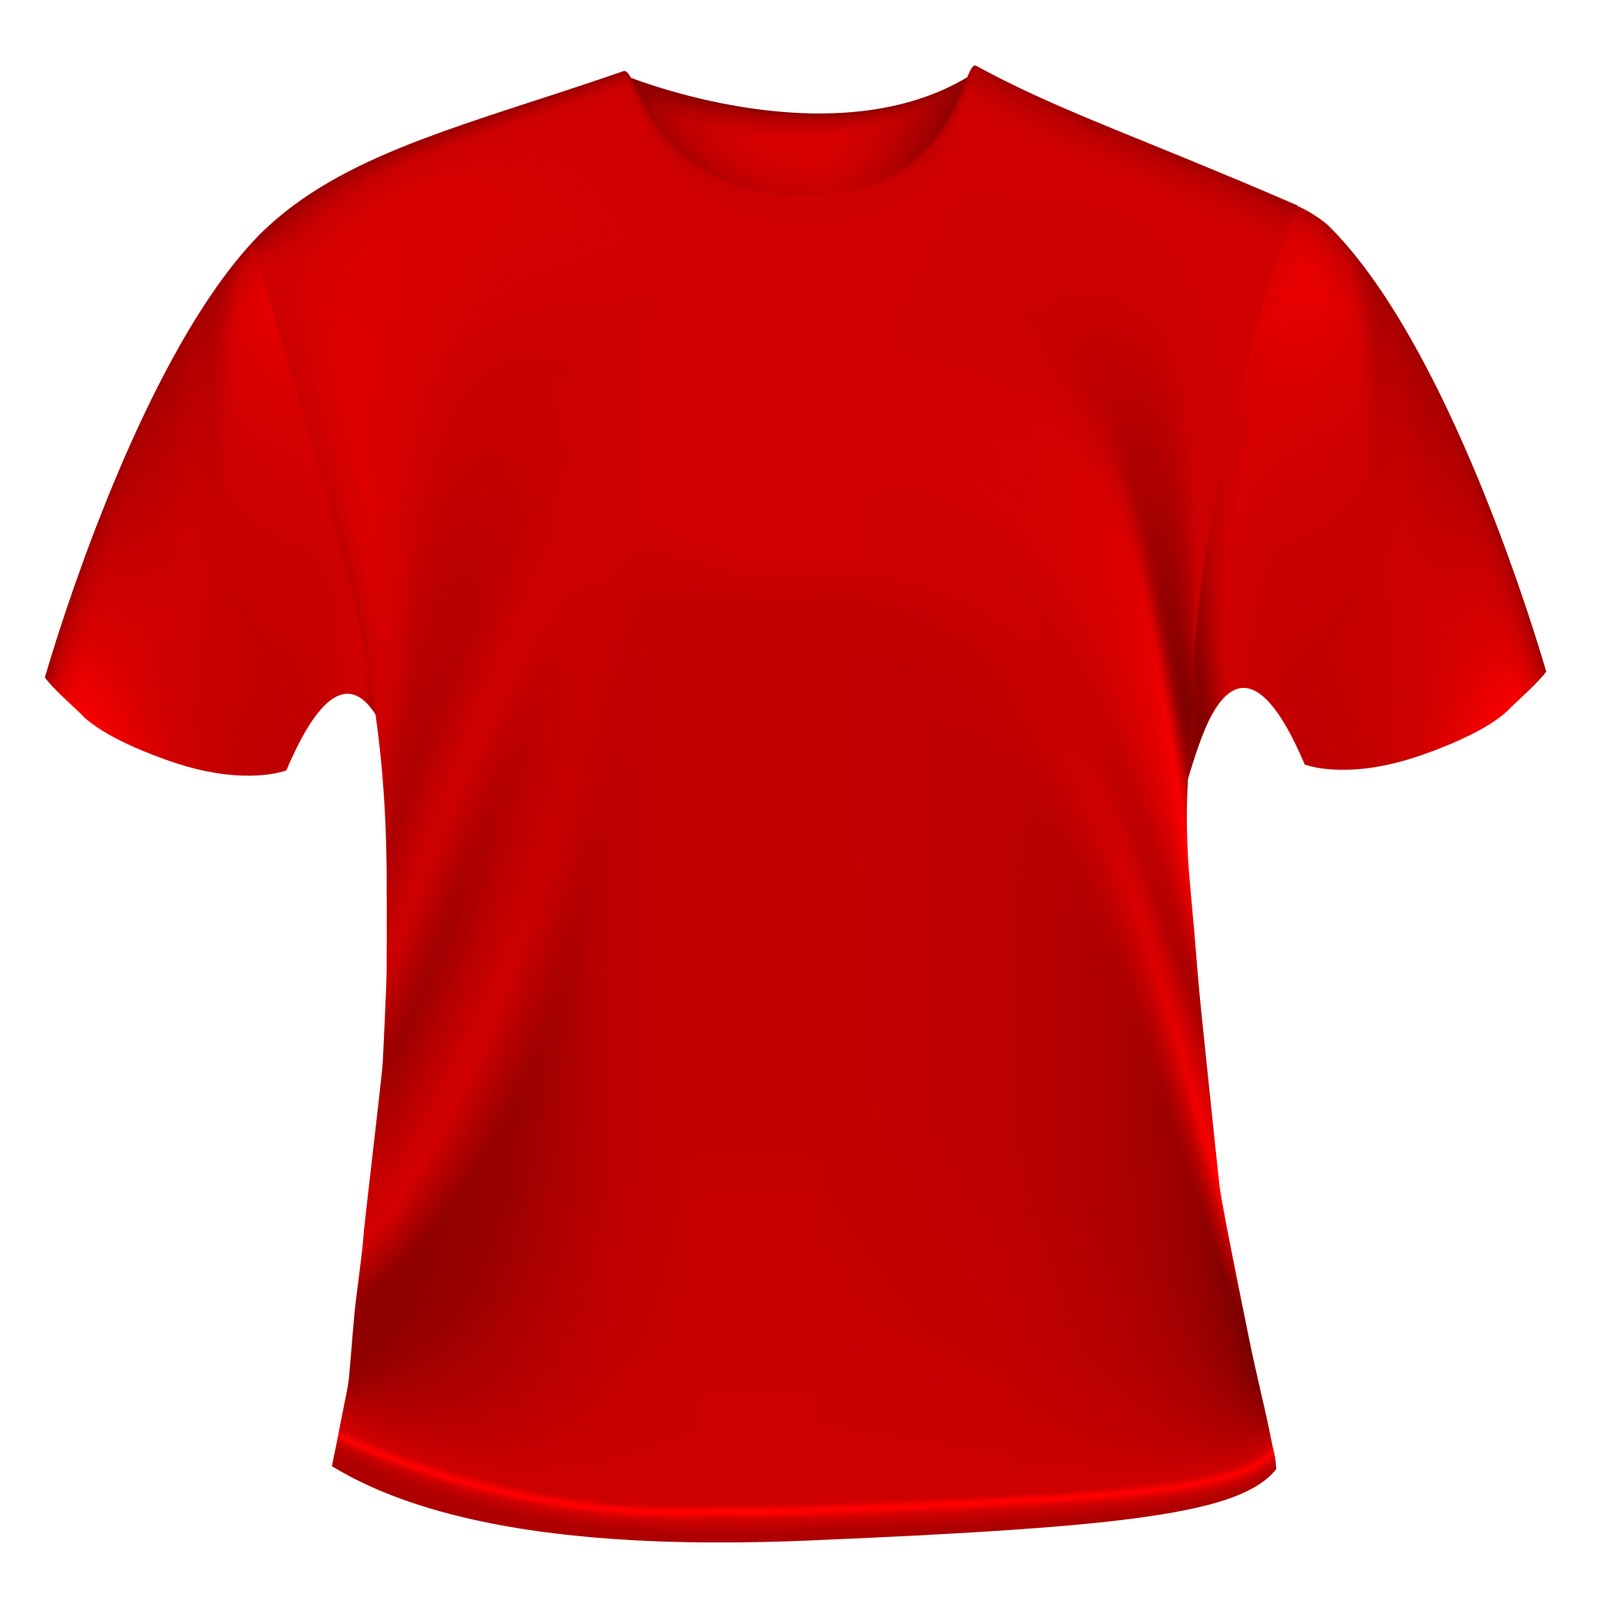 Red T-Shirt Template